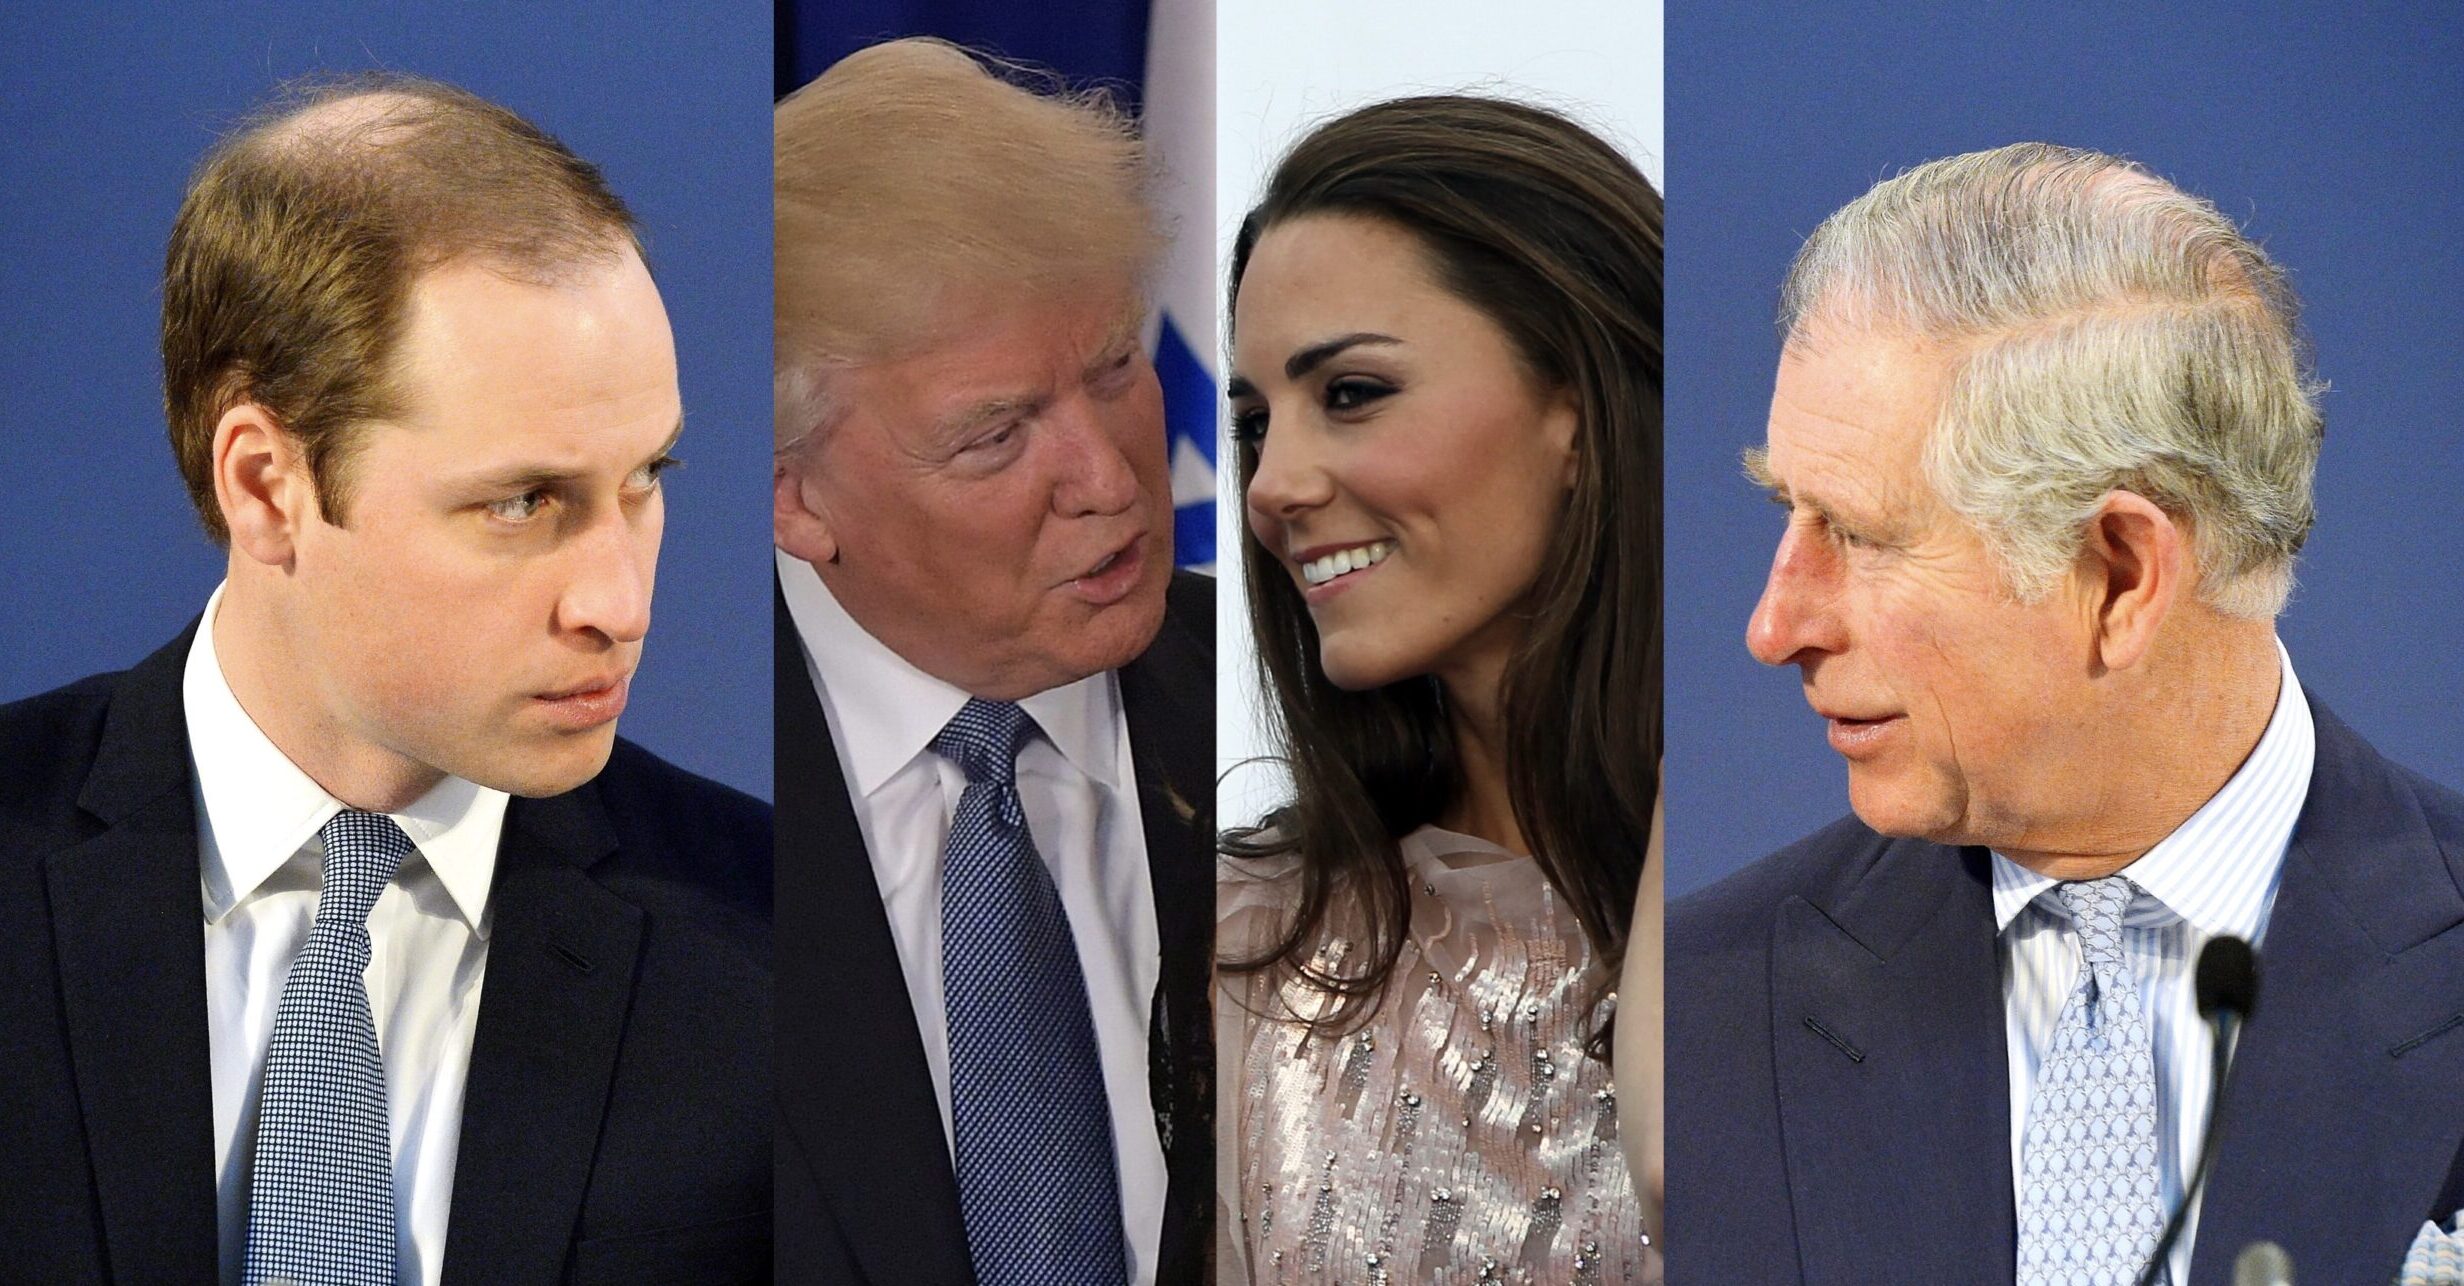 Trump Royally Pissed Off Charles and William By Asking ‘Who Wouldn’t’ Take Naked Pics of Kate Middleton Amid Scandal: Book